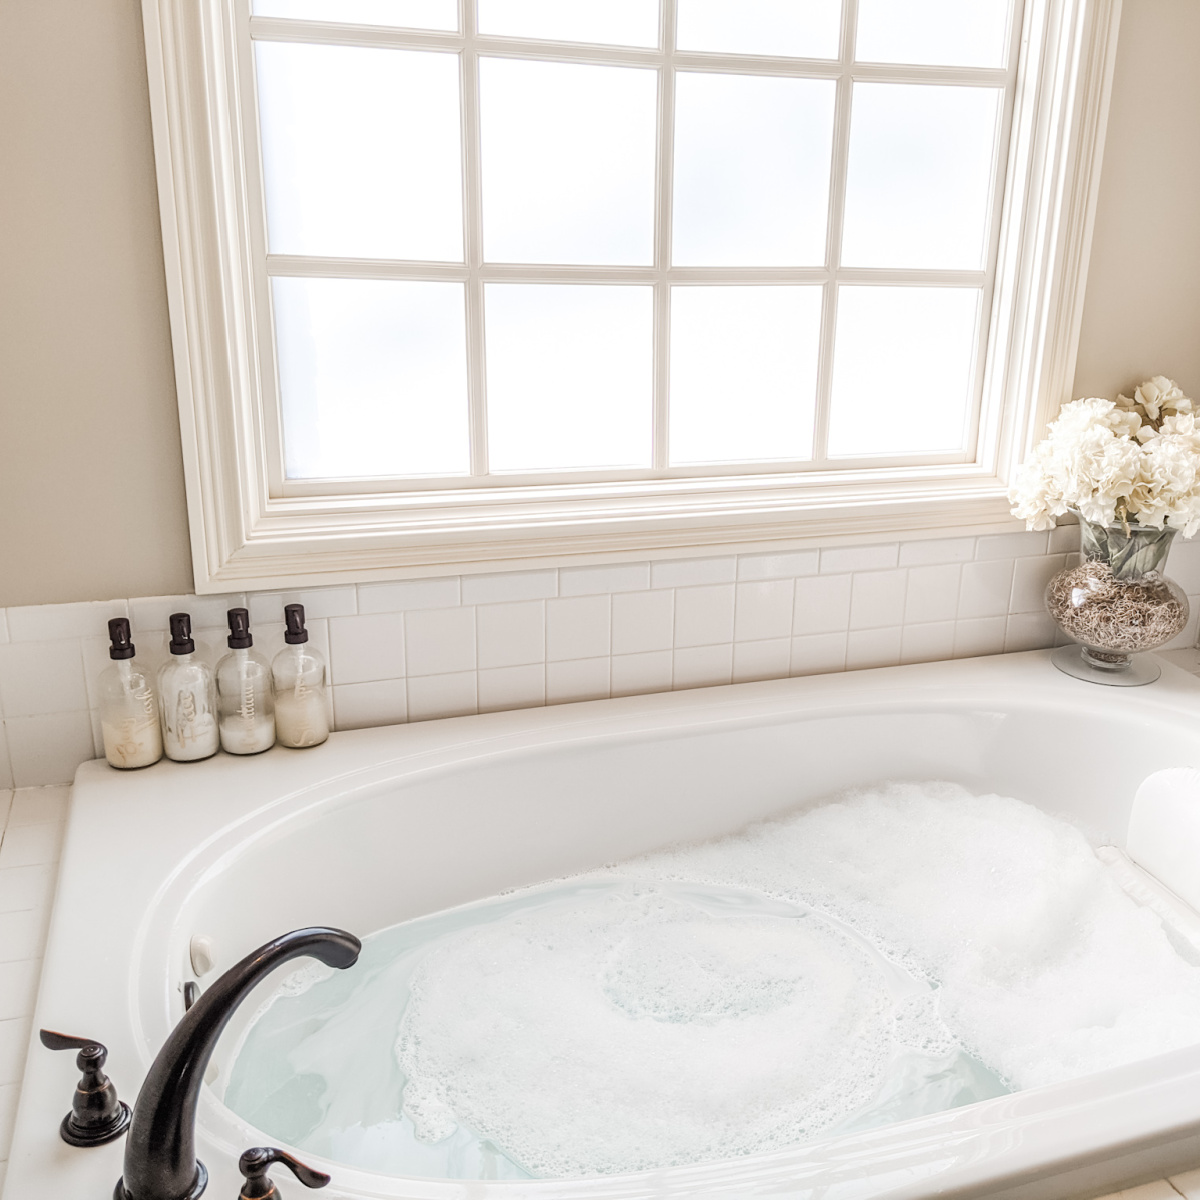 How To Clean A Whirlpool Tub - Frugally Blonde